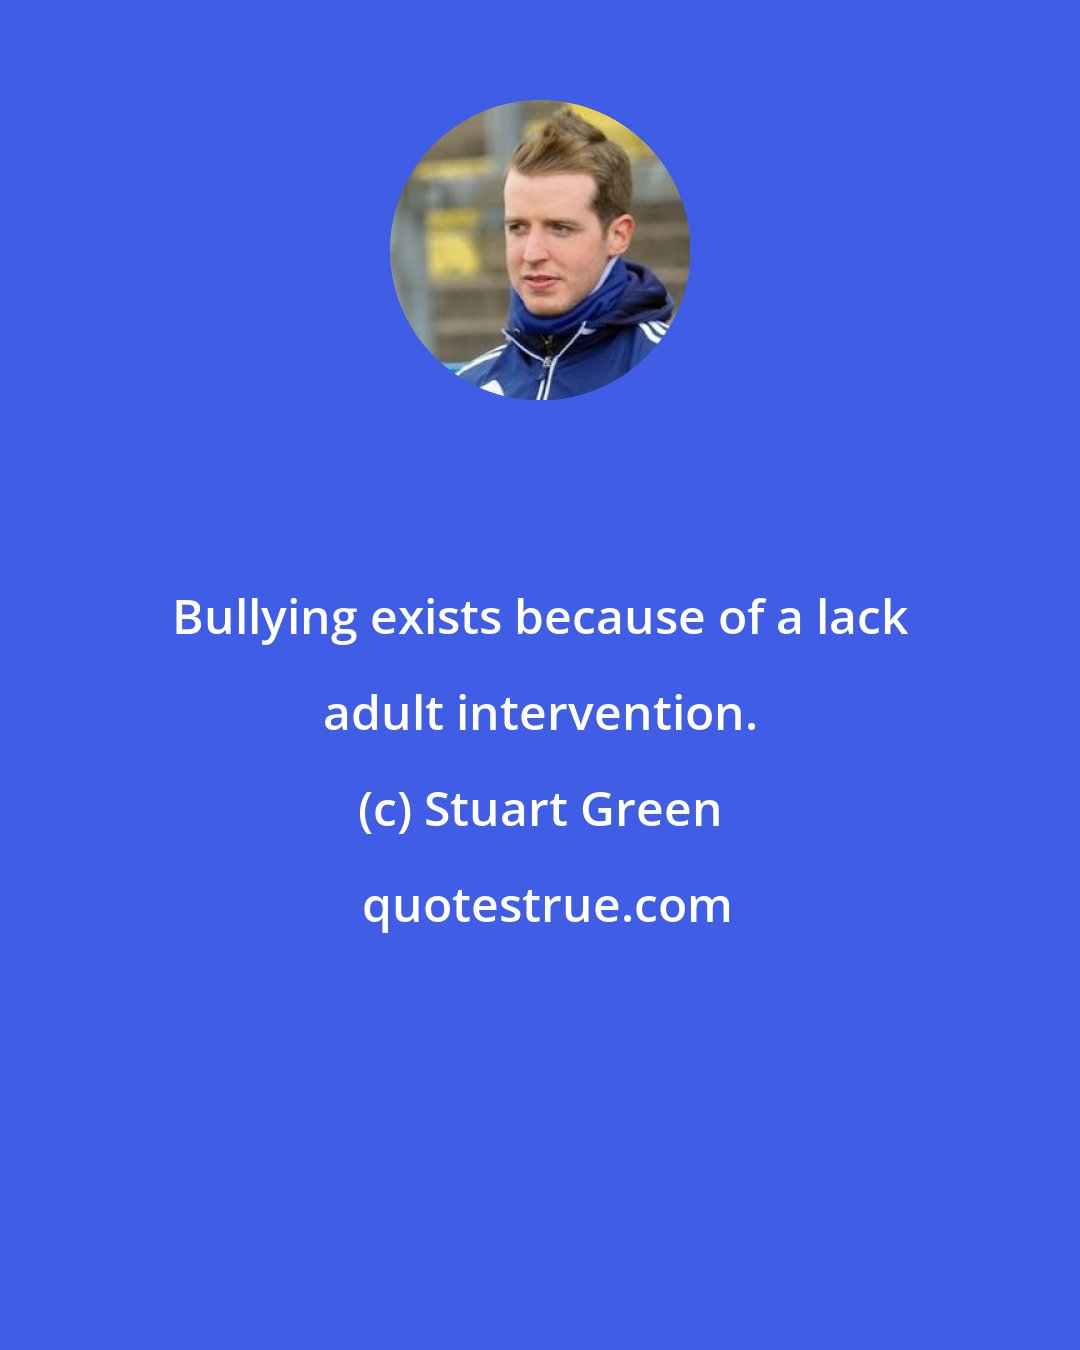 Stuart Green: Bullying exists because of a lack adult intervention.